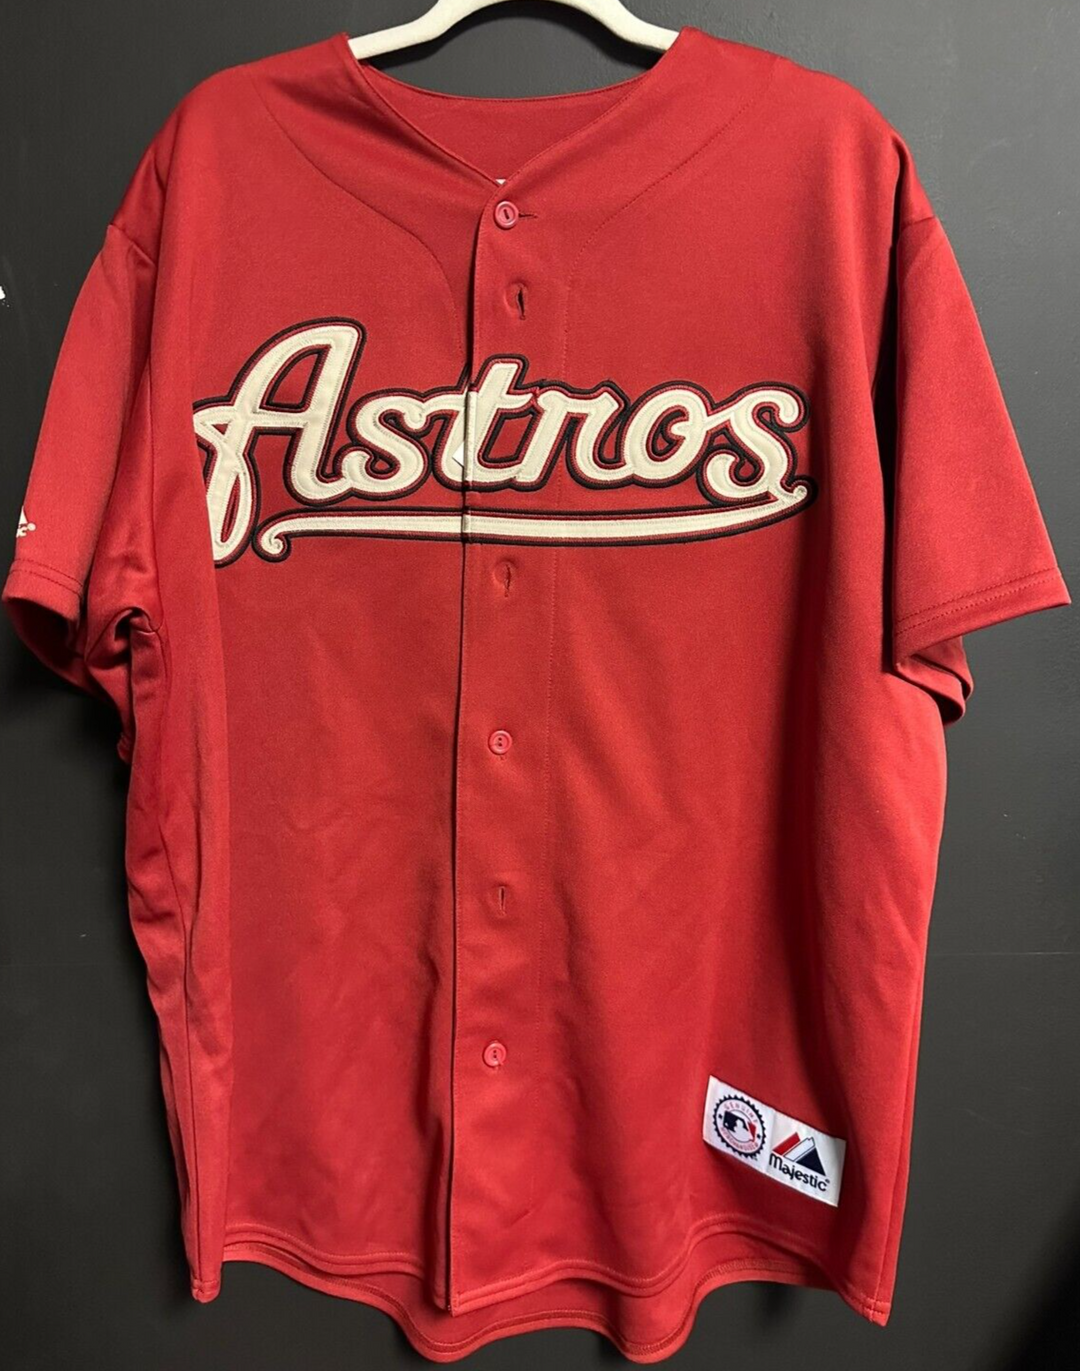 Roger Clemens Autographed Majestic Houston Astros Jersey MLB Tri-Star